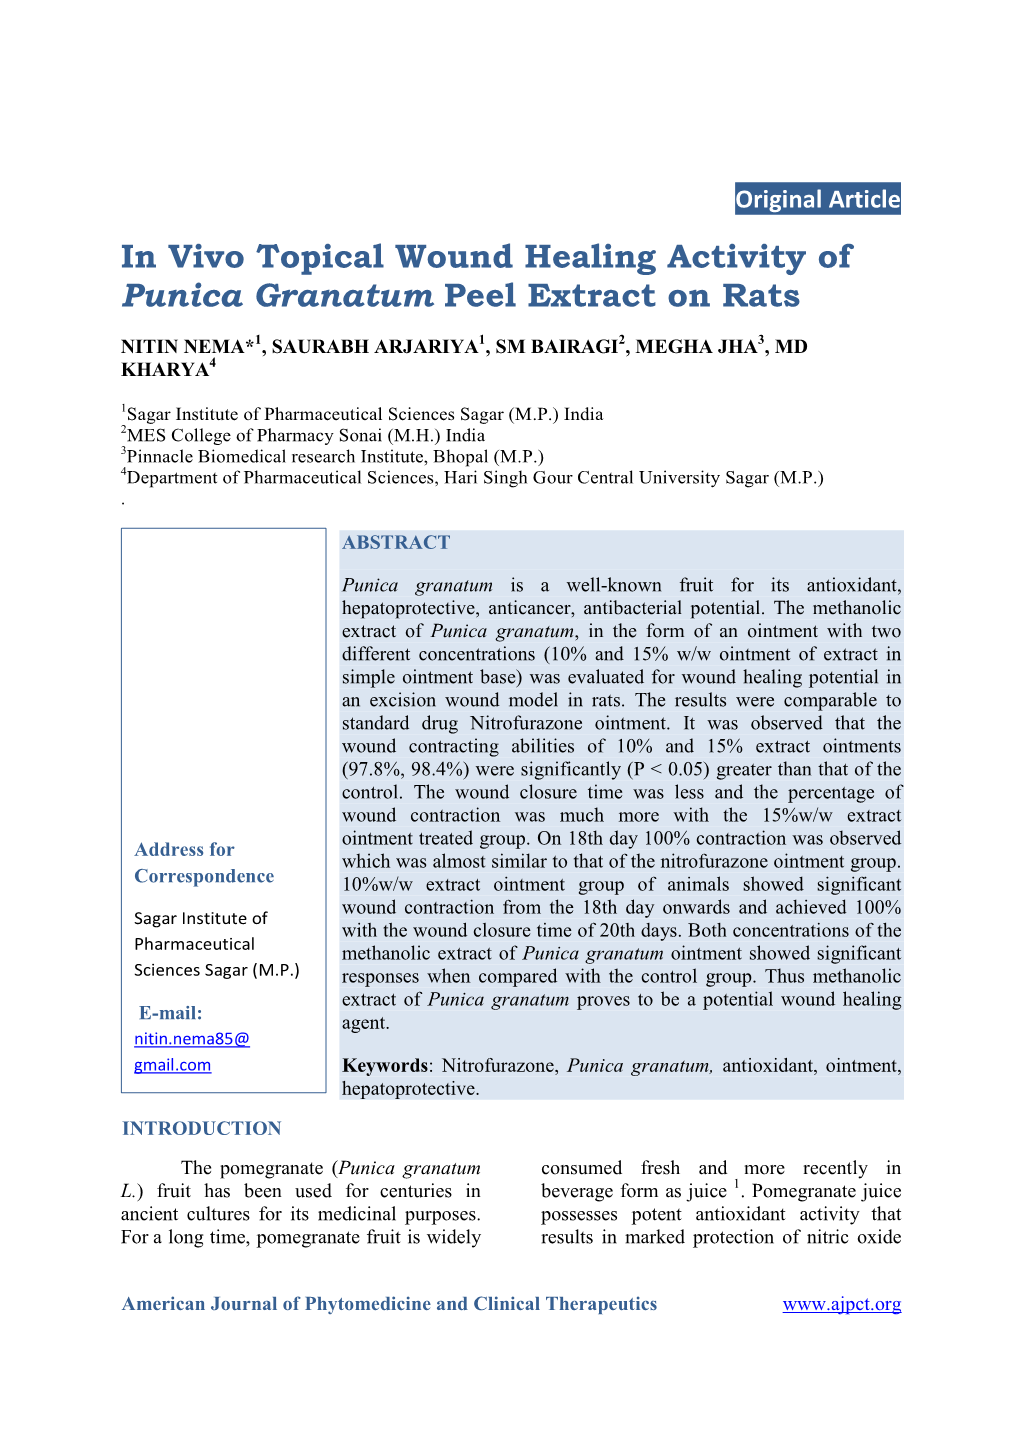 In Vivo Topical Wound Healing Activity of Punica Granatum Peel Extract on Rats